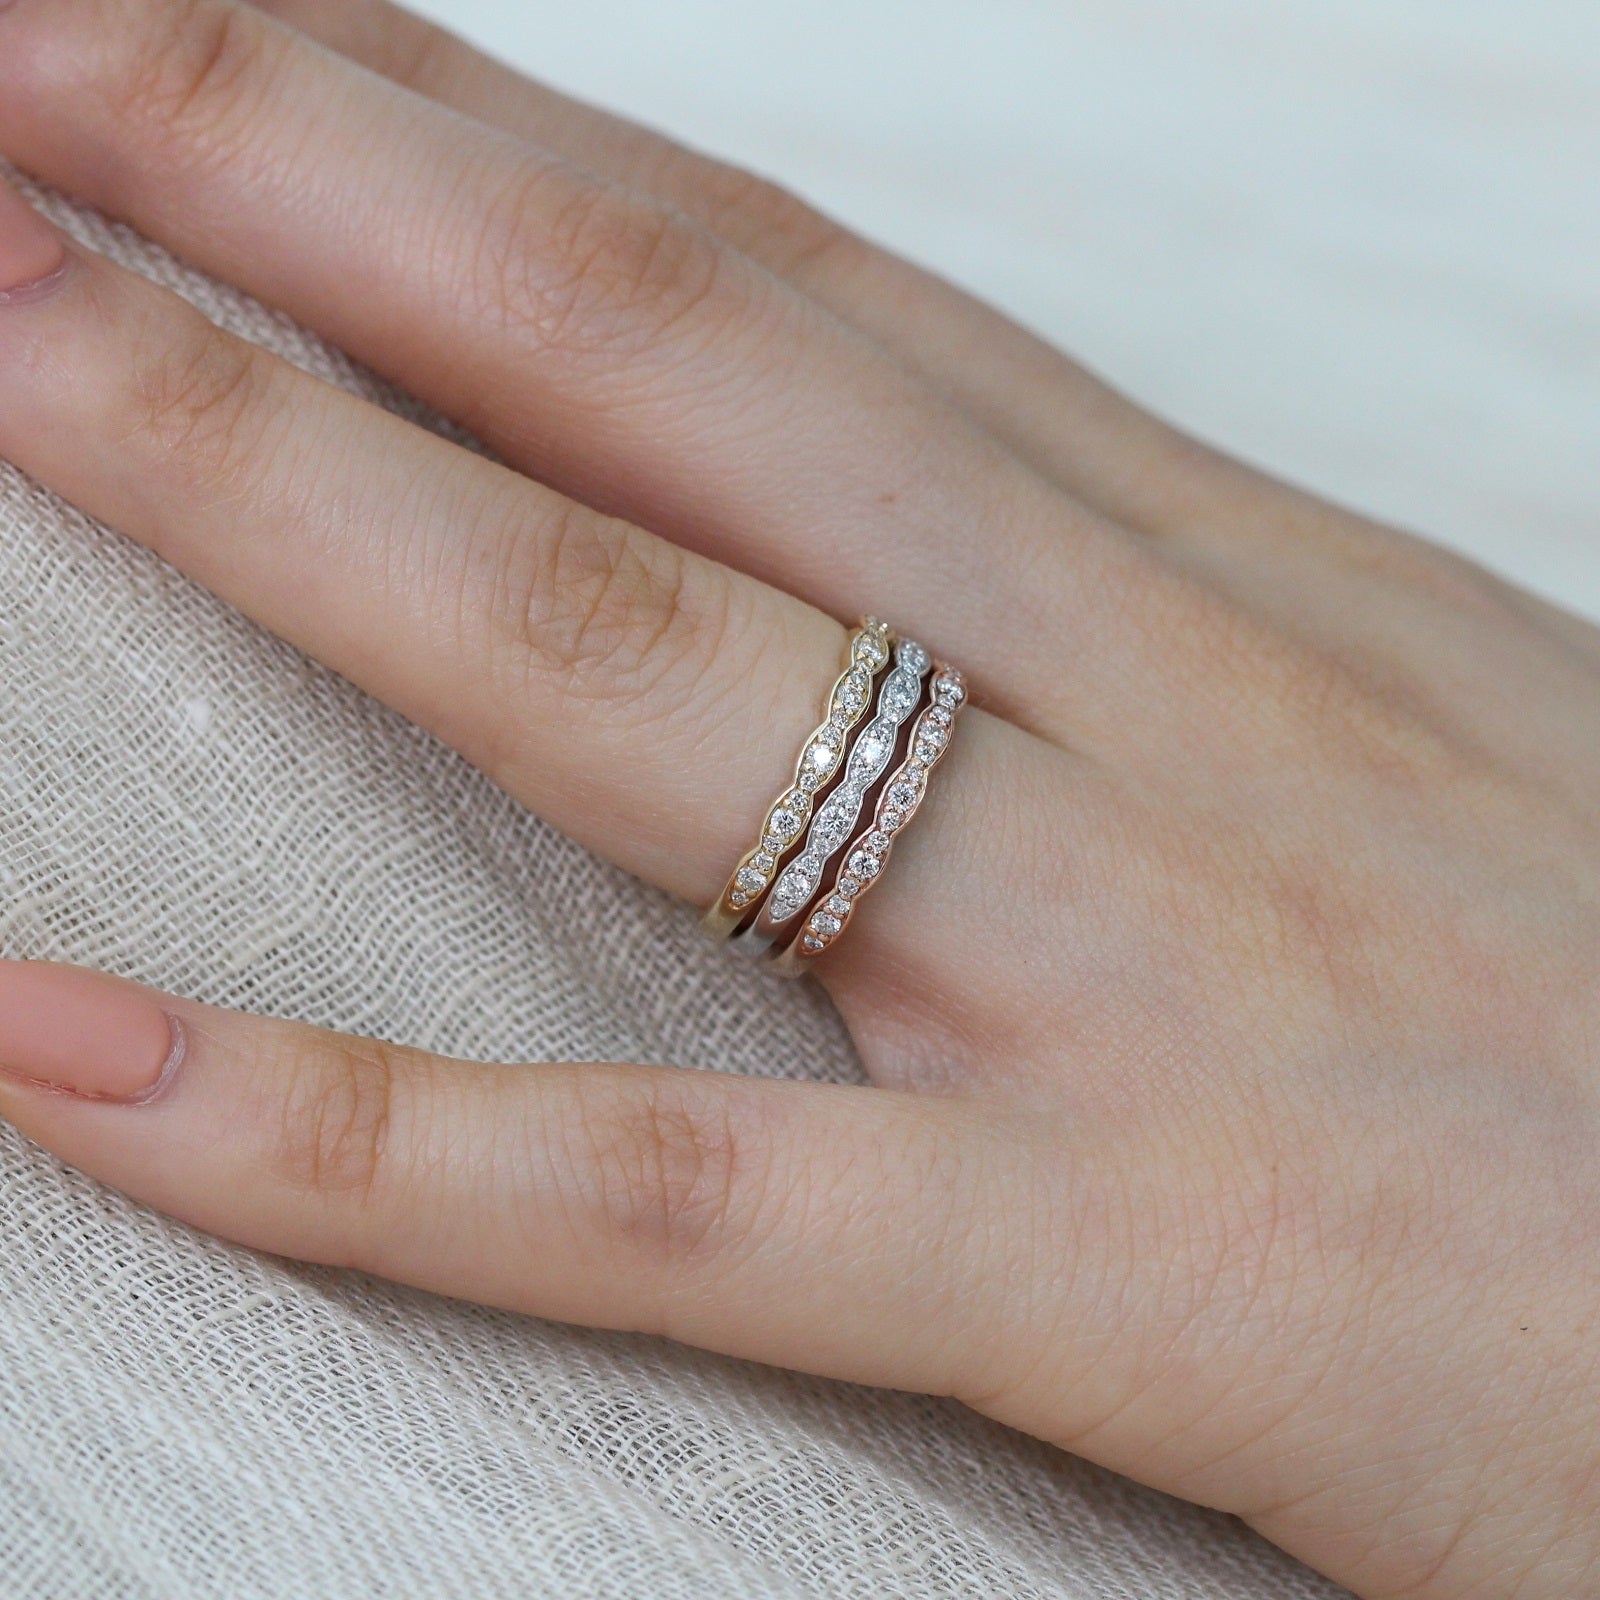 Scalloped diamond wedding band in rose gold white gold yellow gold by la more design